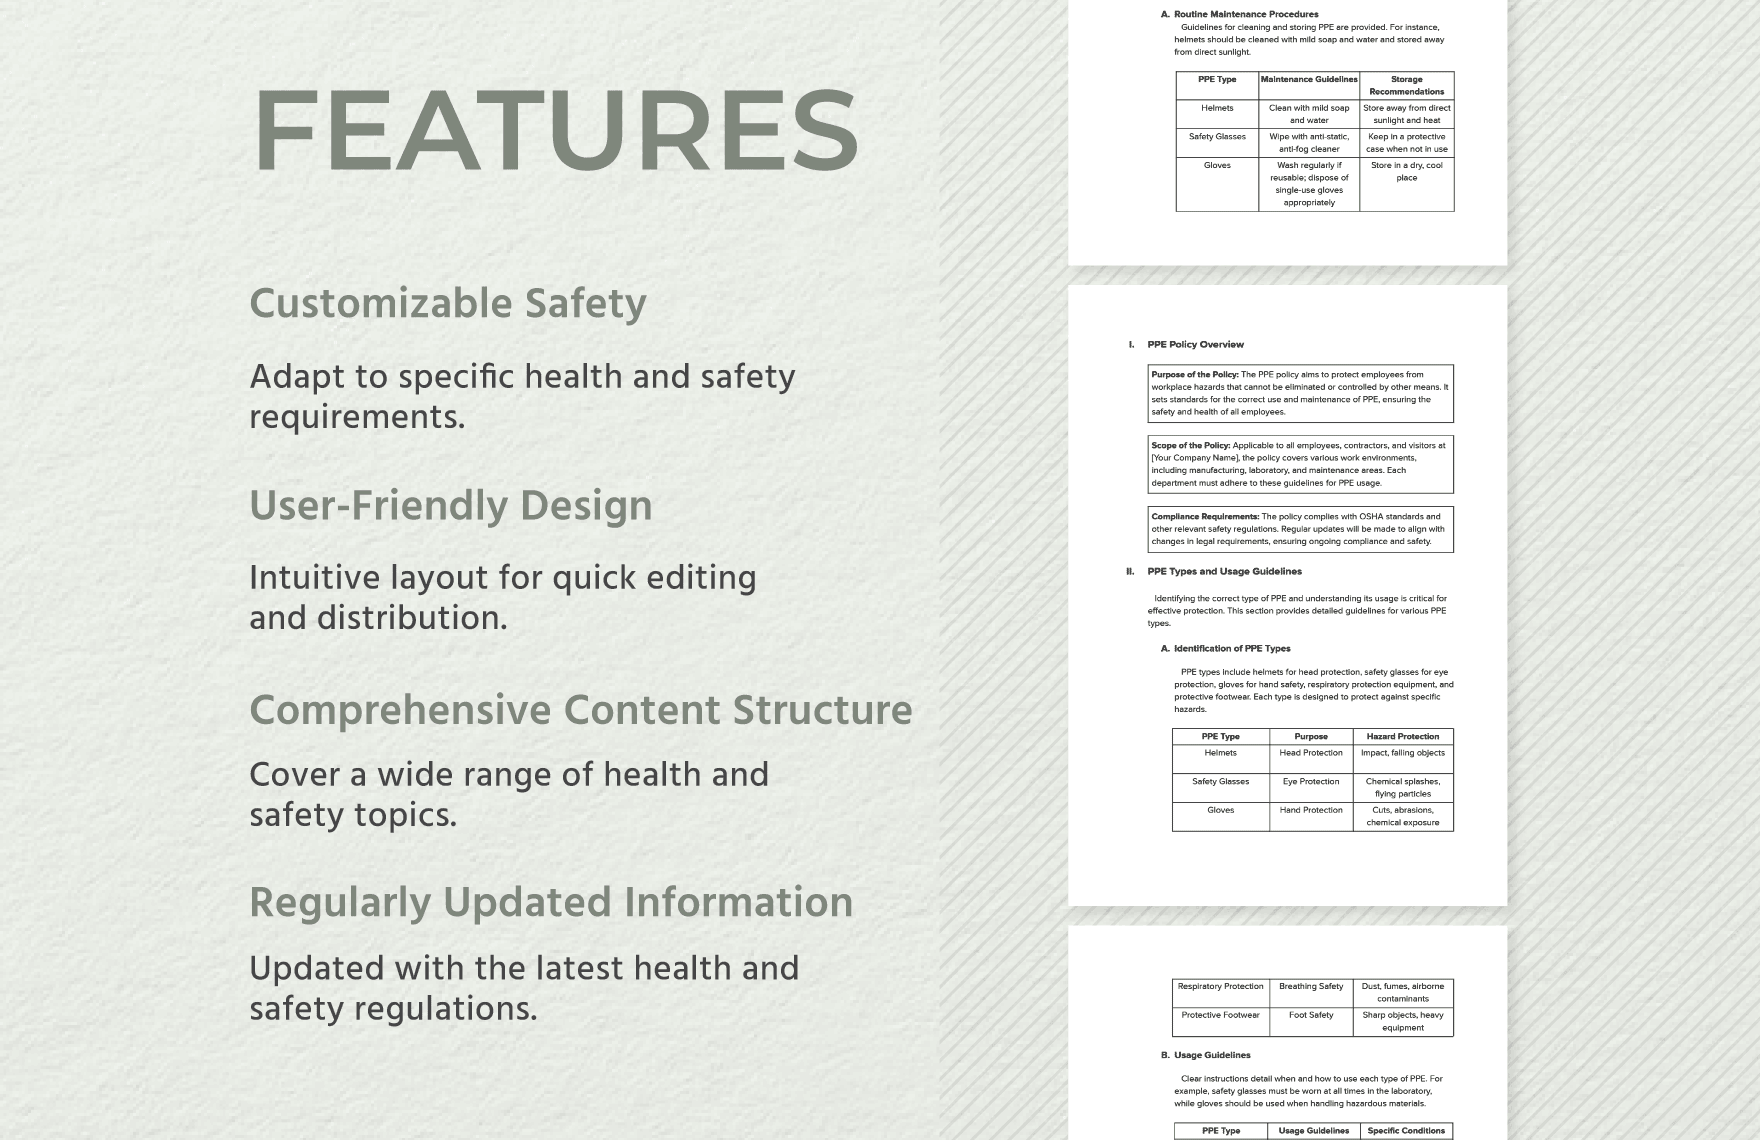 PPE Policy & Procedure Manual Template